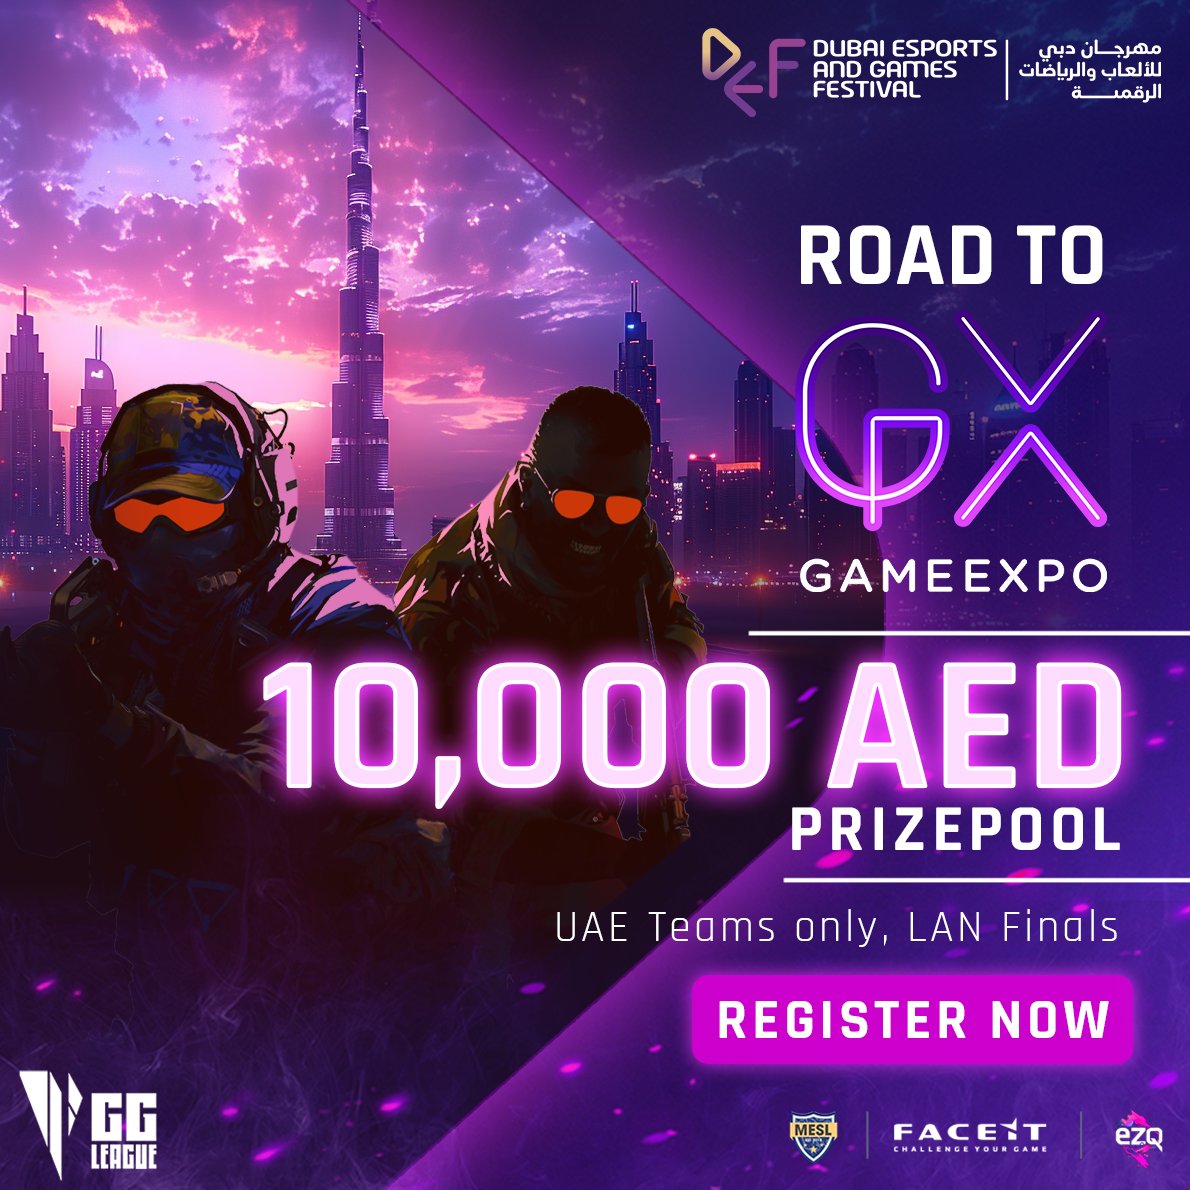 🔥 This time GG League is heading to DUBAI ESPORTS AND GAMES FESTIVAL with GG LEAGUE - Road to GameExpo  the real deal will start now! 

🚨 REGISTRATION CLOSES ON SUNDAY! 📅

🇦🇪 OPEN TO UAE ONLY

Register Here: ggleague.info

#esports #CounterStrike2 #DEF2024 #MESL #EZQ